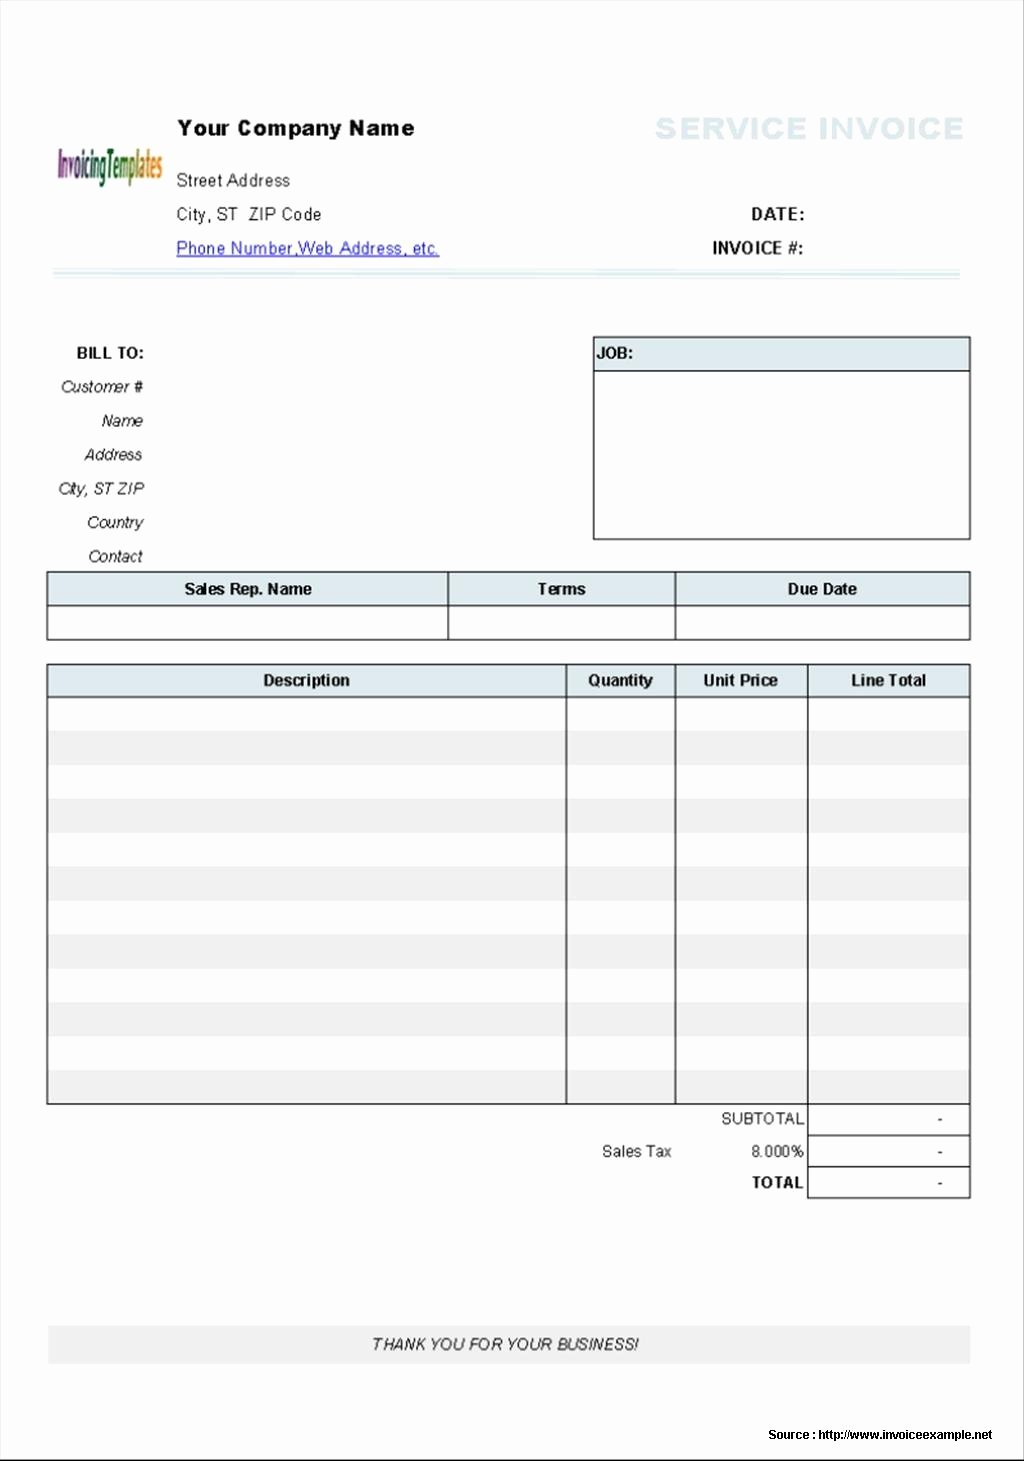 Blank Invoice Template Download Free form Resume